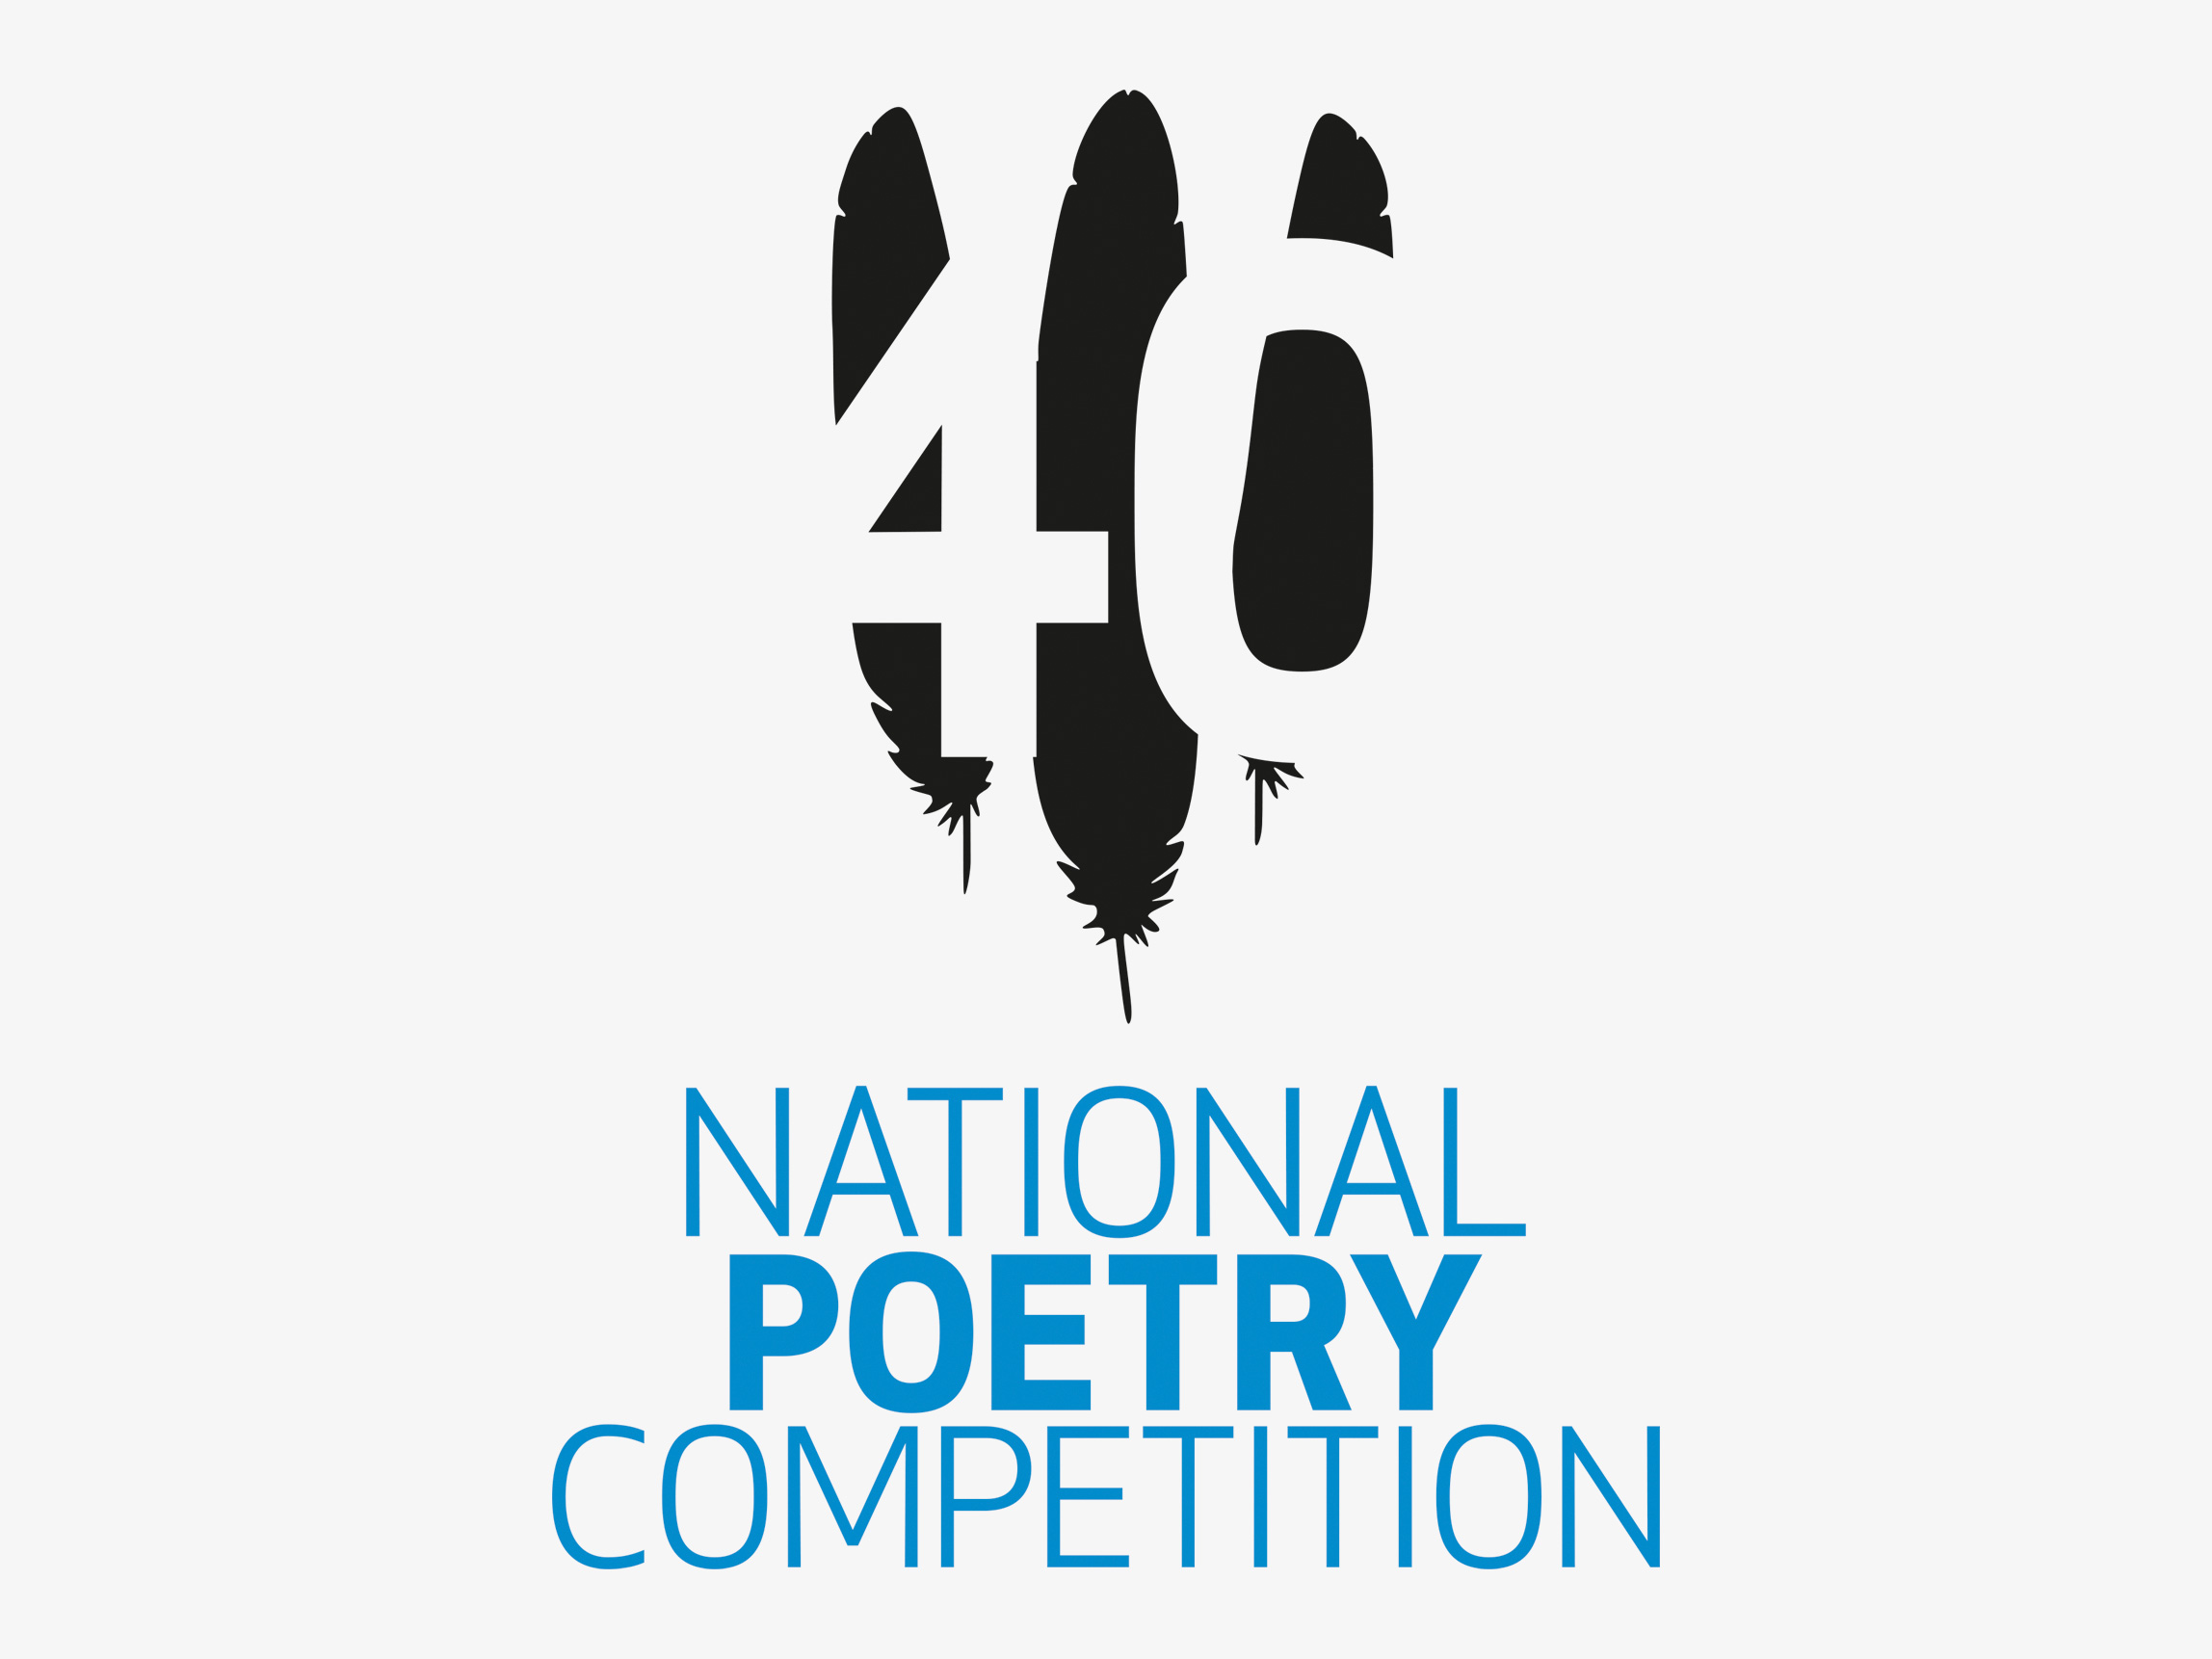 National Poetry Competition 40th anniversary logo with three feathers